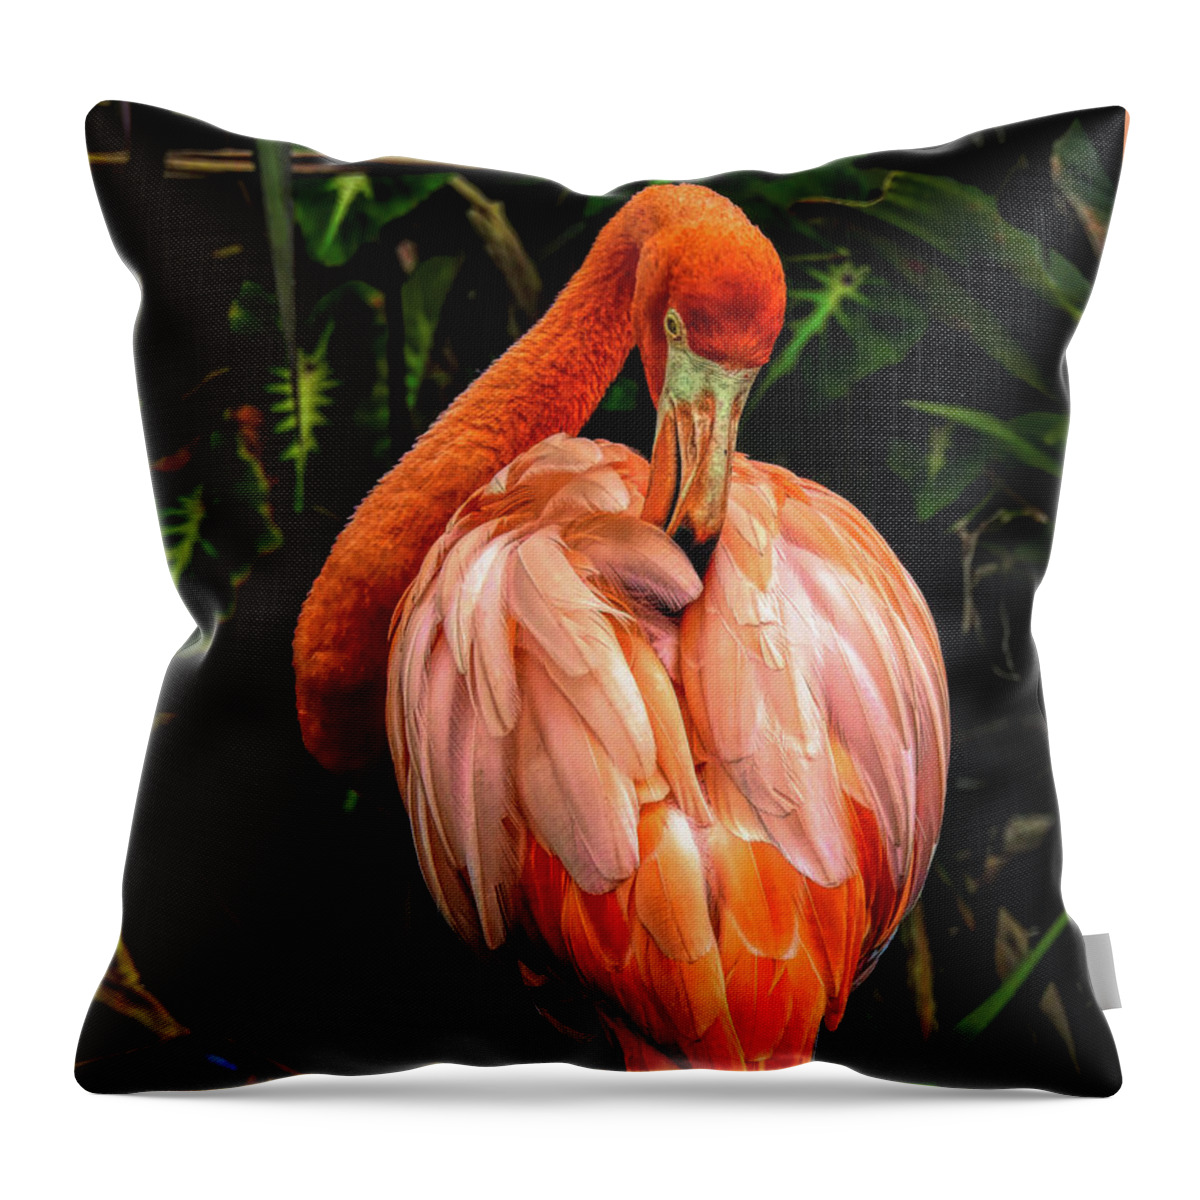 Flamingo Throw Pillow featuring the photograph Flamingo Ruffles Some Feathers by Robert Stanhope